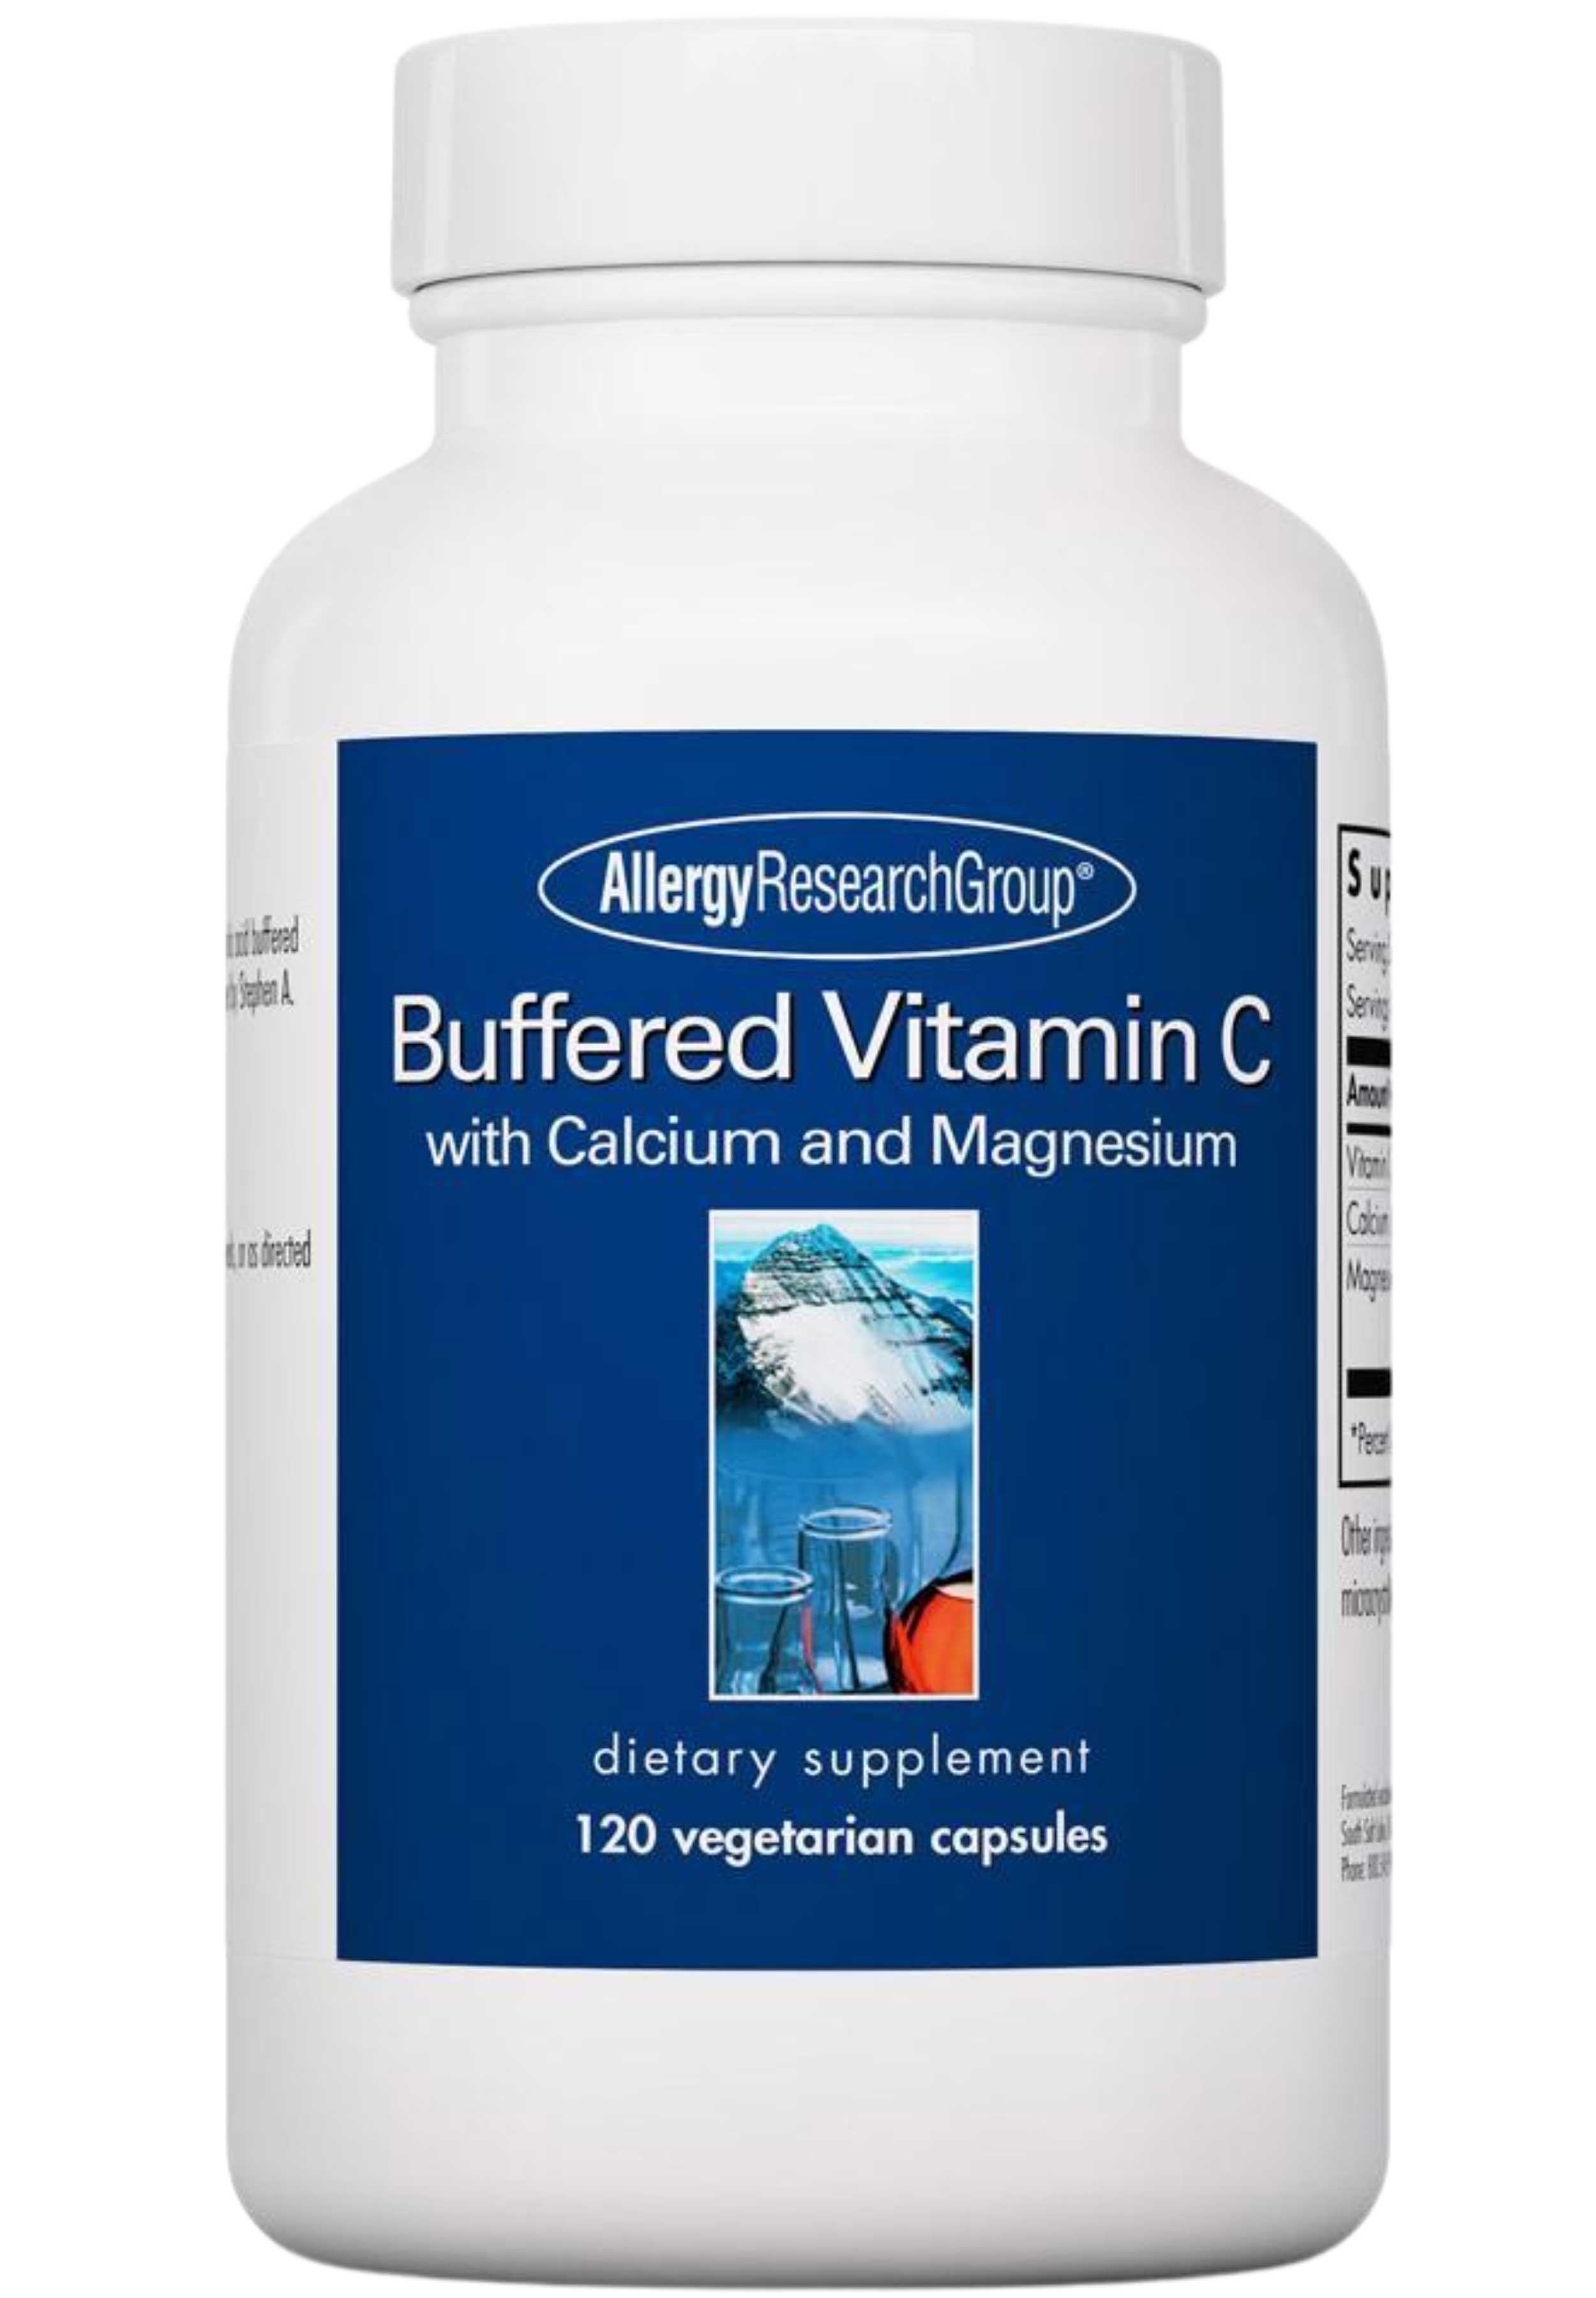 Allergy Research Group Buffered Vitamin C